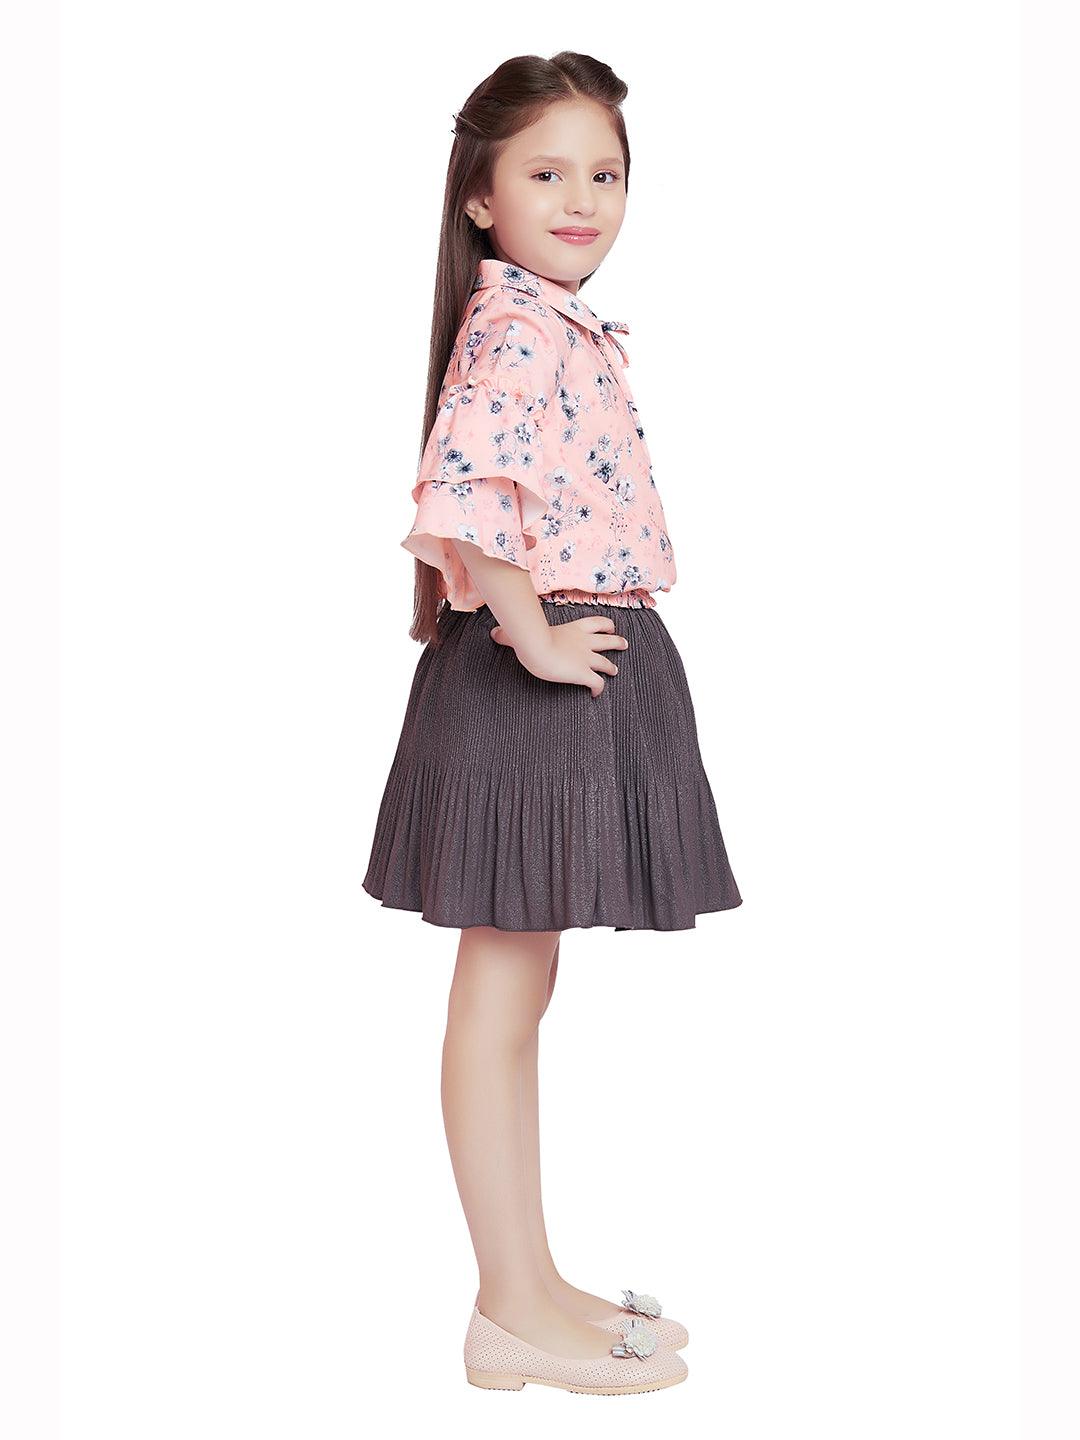 Grey Coloured Skirt Top Set - 2118 Grey - TINY BABY INDIA shop.tinybaby.in